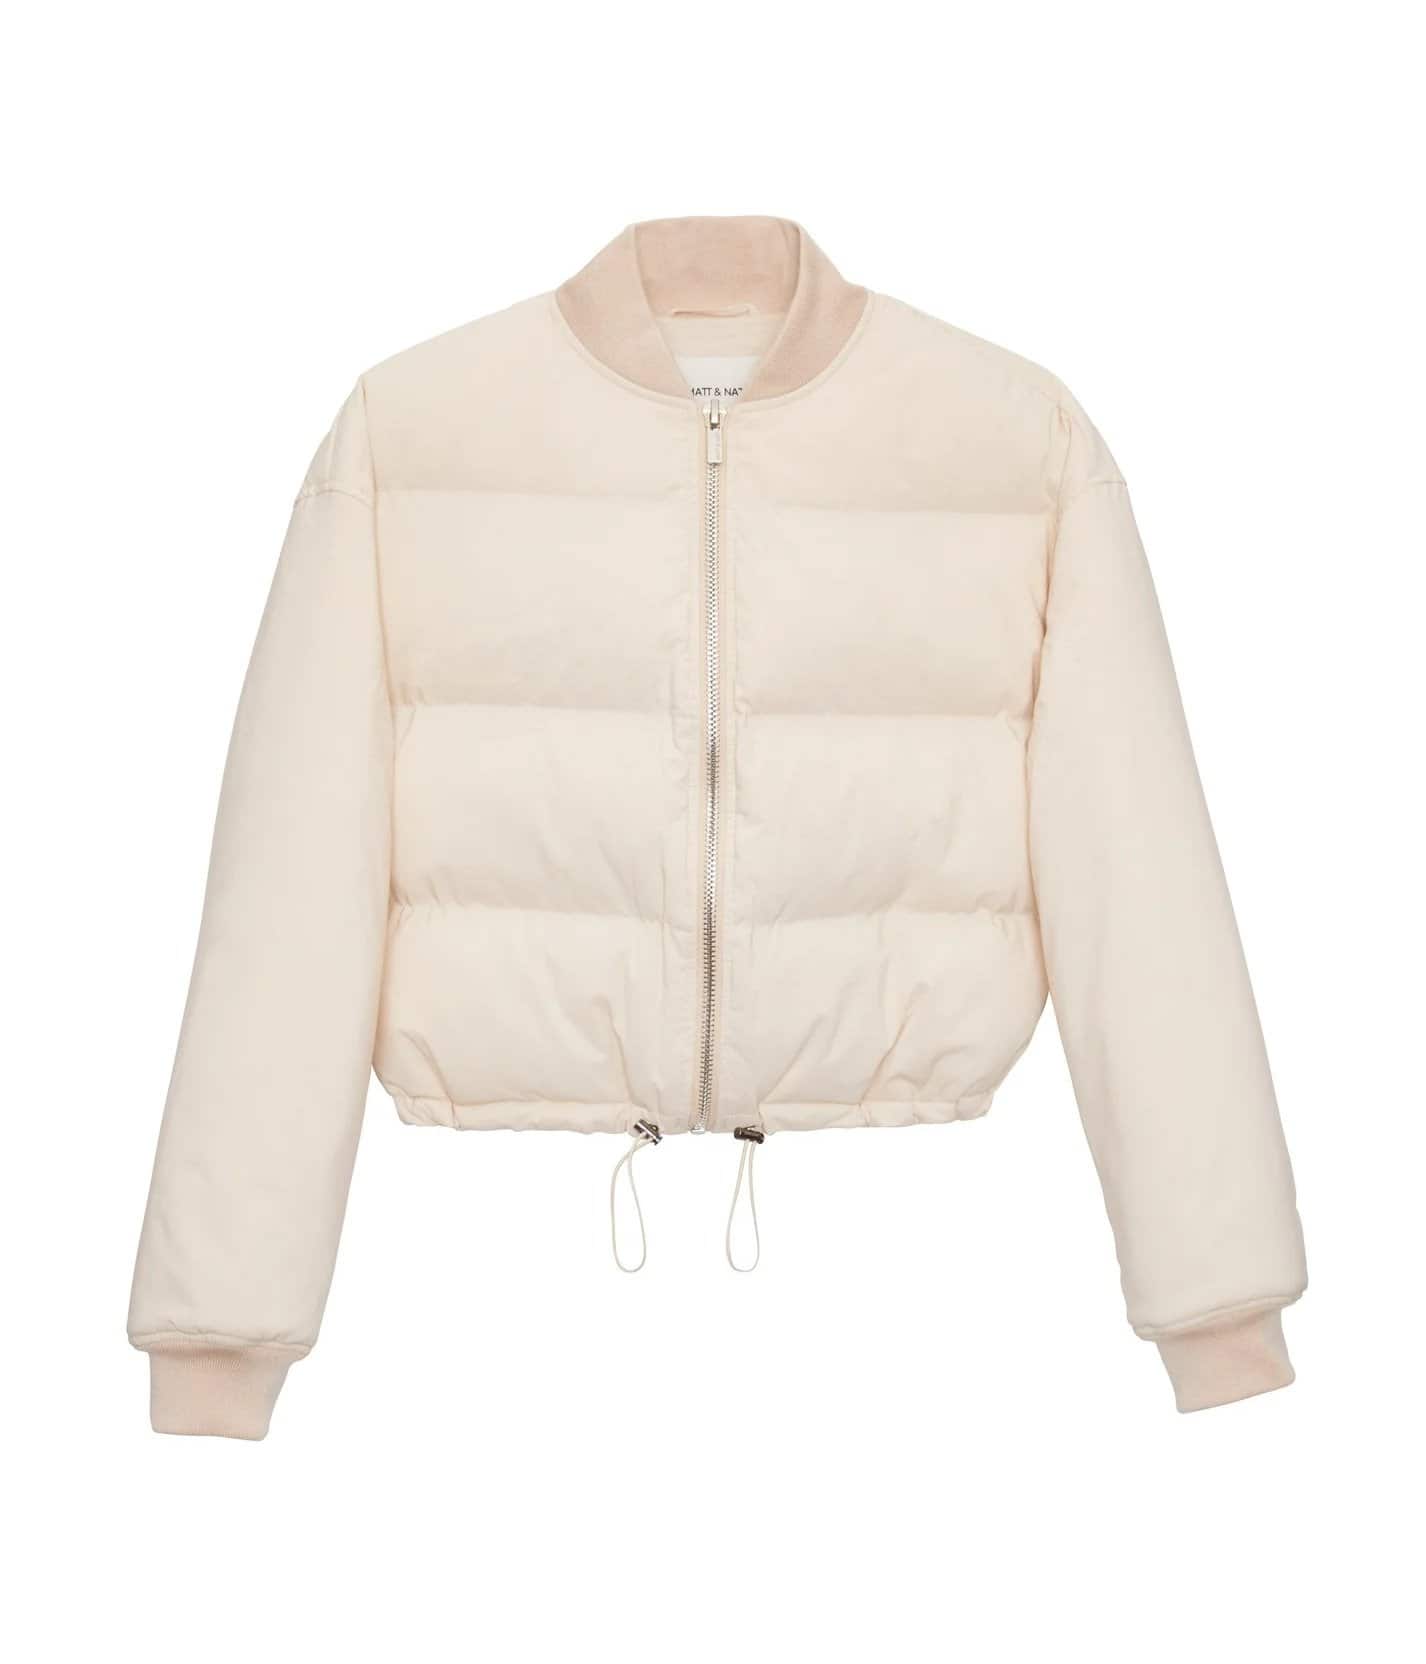 White puffer bomber jacket with zip up front from Matt and Nat